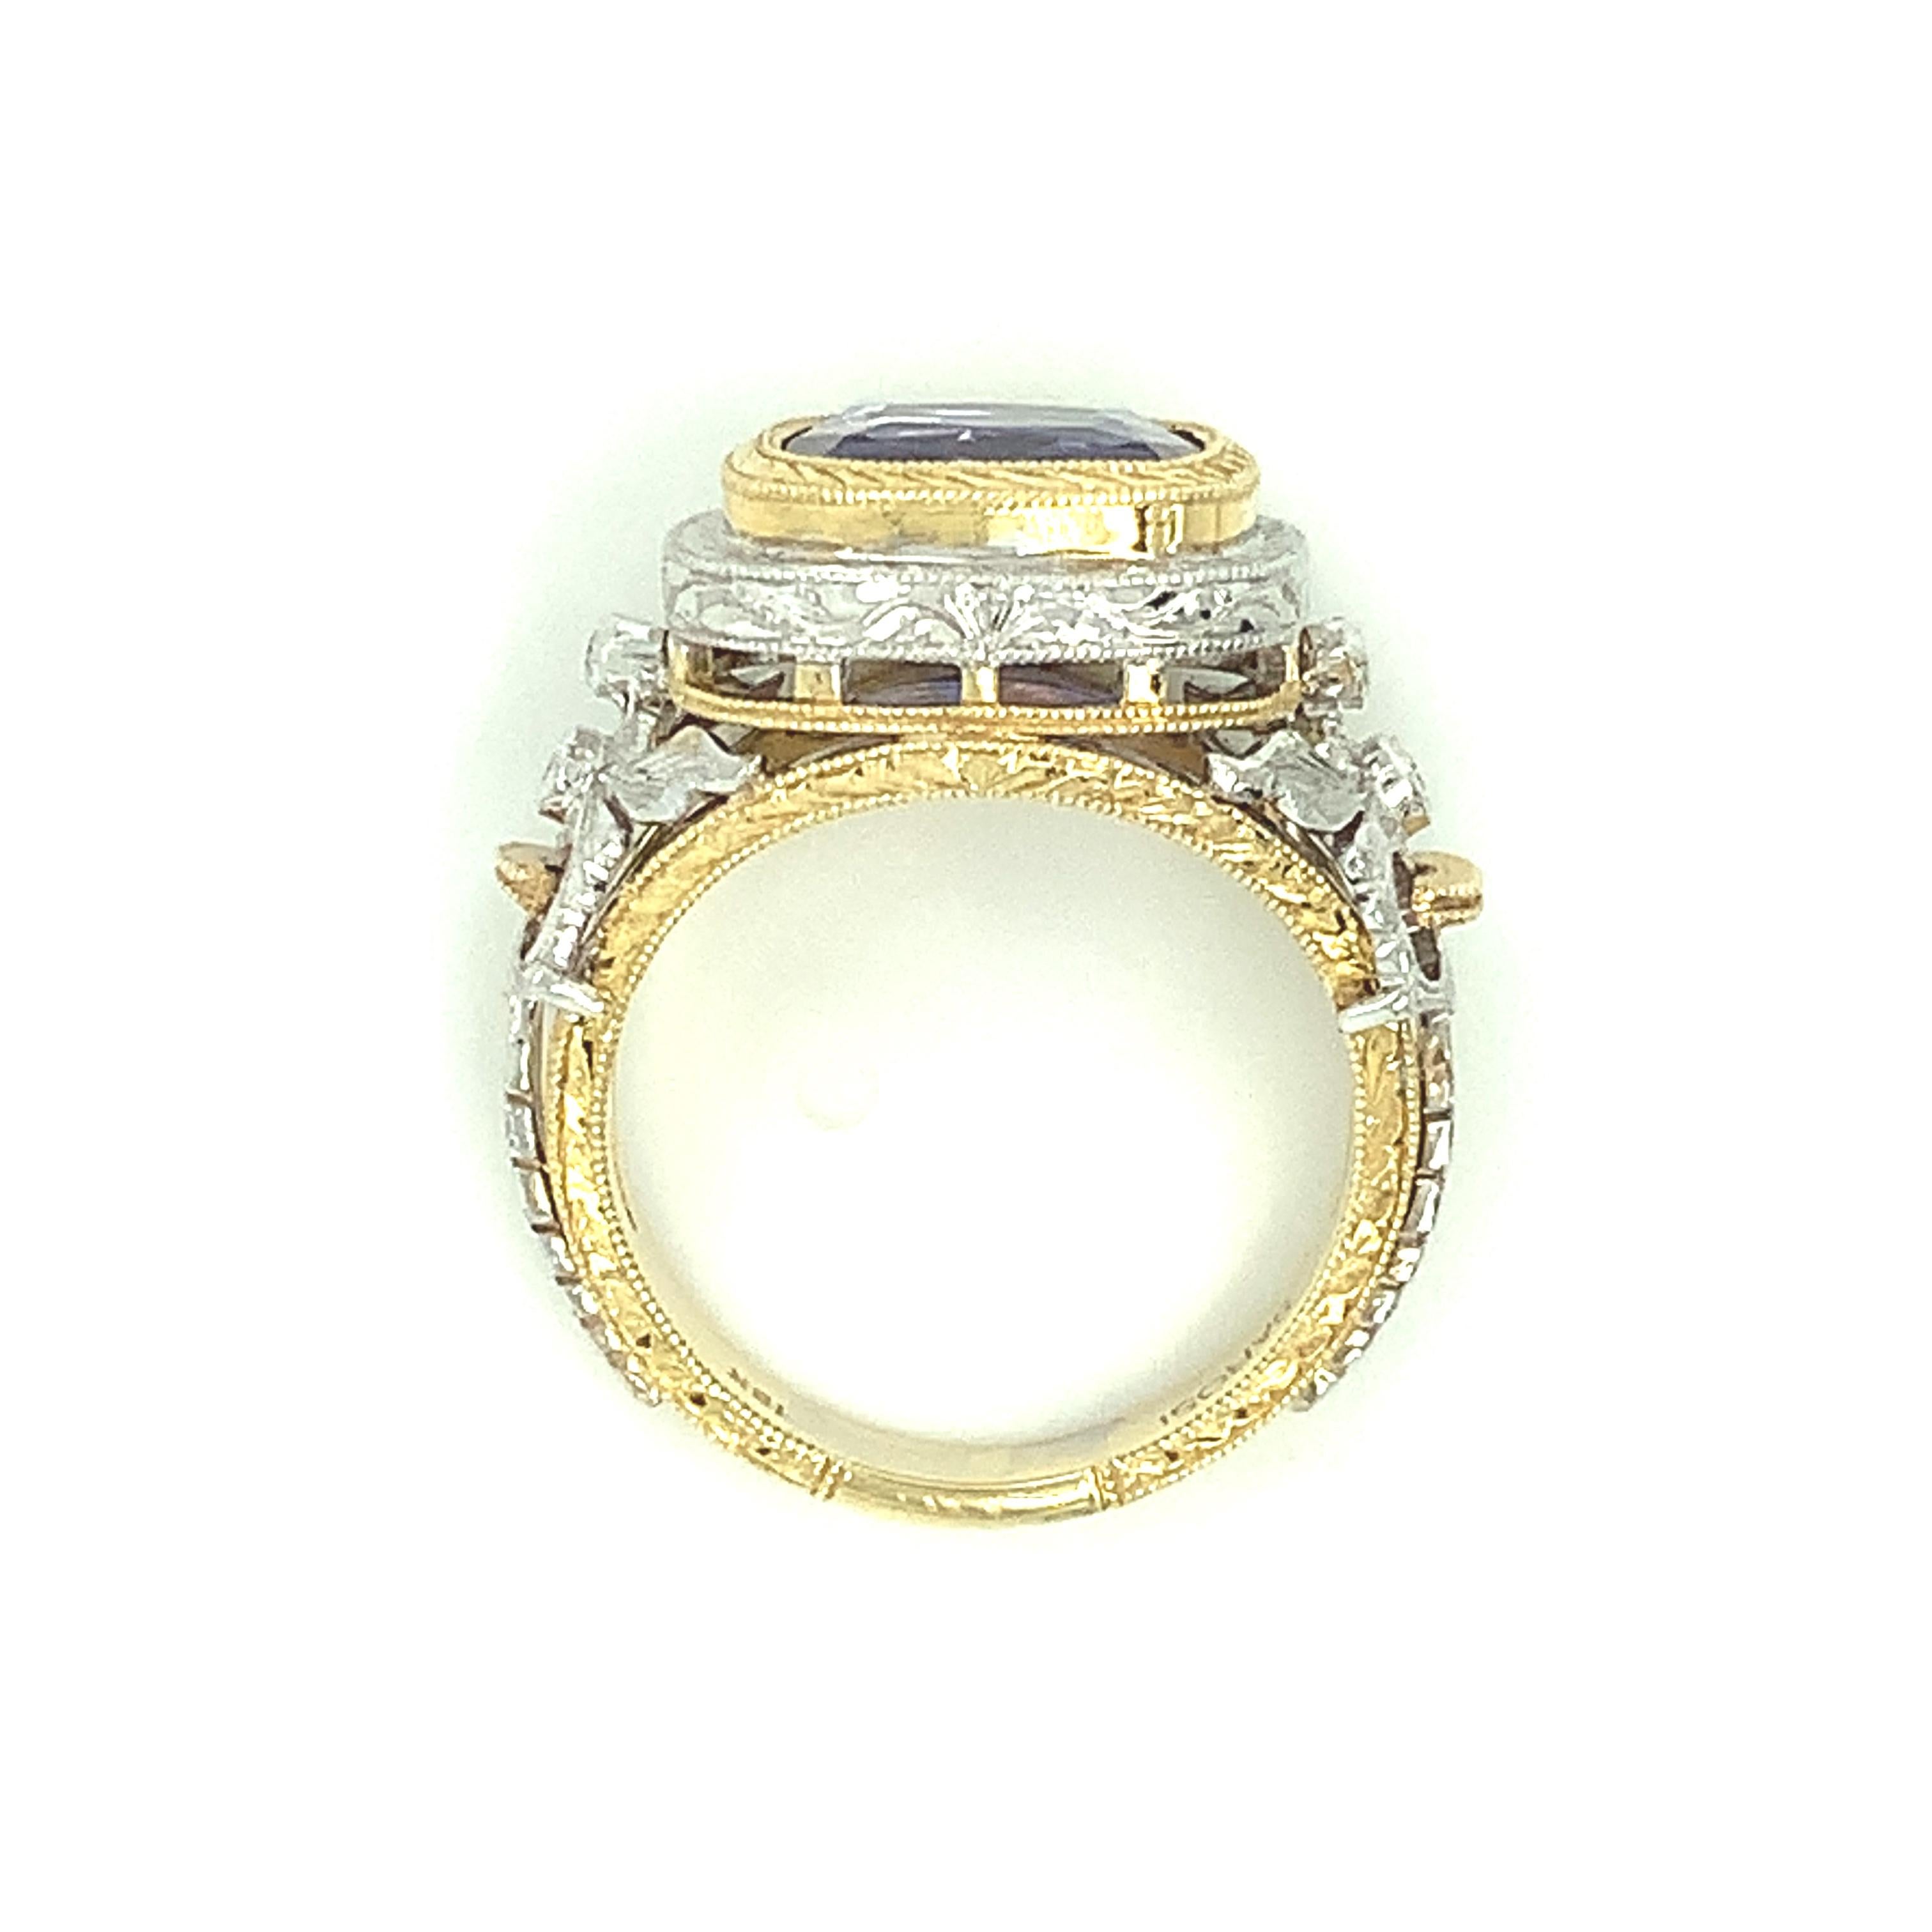 4.04 Carat Tanzanite and Diamond Cocktail Ring, Handmade in 18k Gold For Sale 5